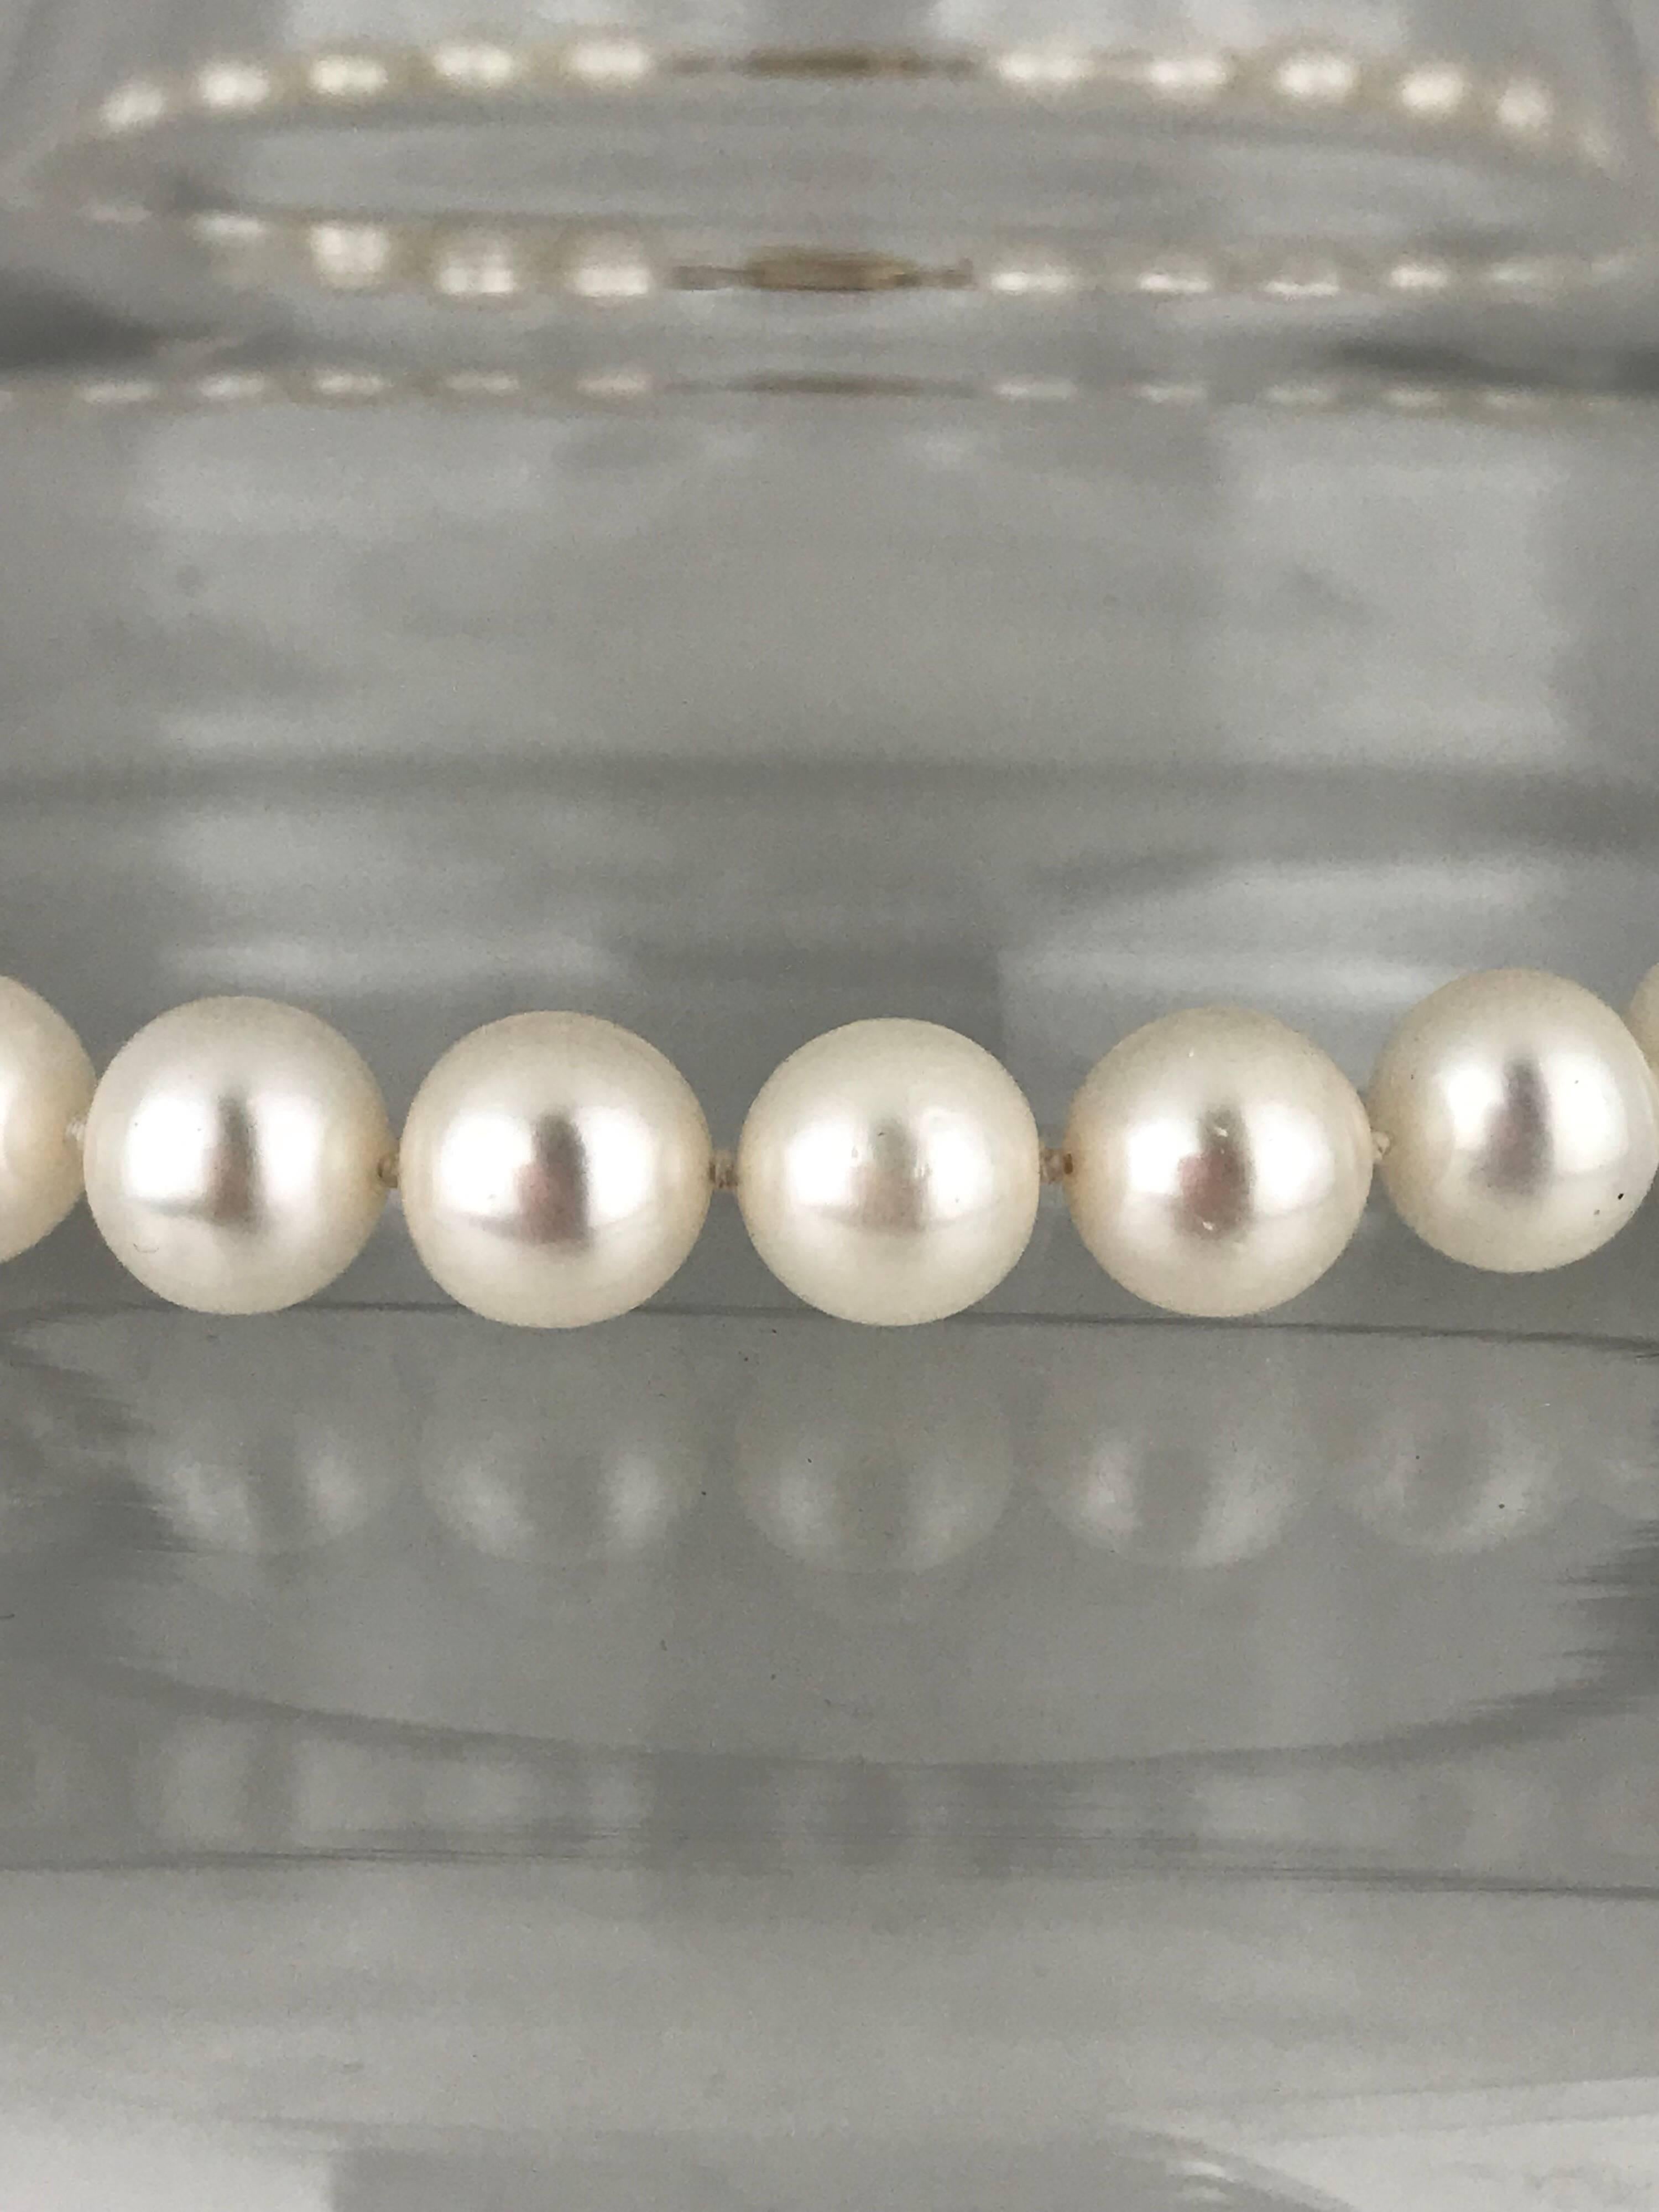 Contemporary strand of lustrous freshwater pearls is individually-knotted and fastens with a classic 14 karat yellow gold clasp.

(41) Round pearls are nicely matched and measure 9.50 - 10.50 mm each. The color of the pearls are white, nicely